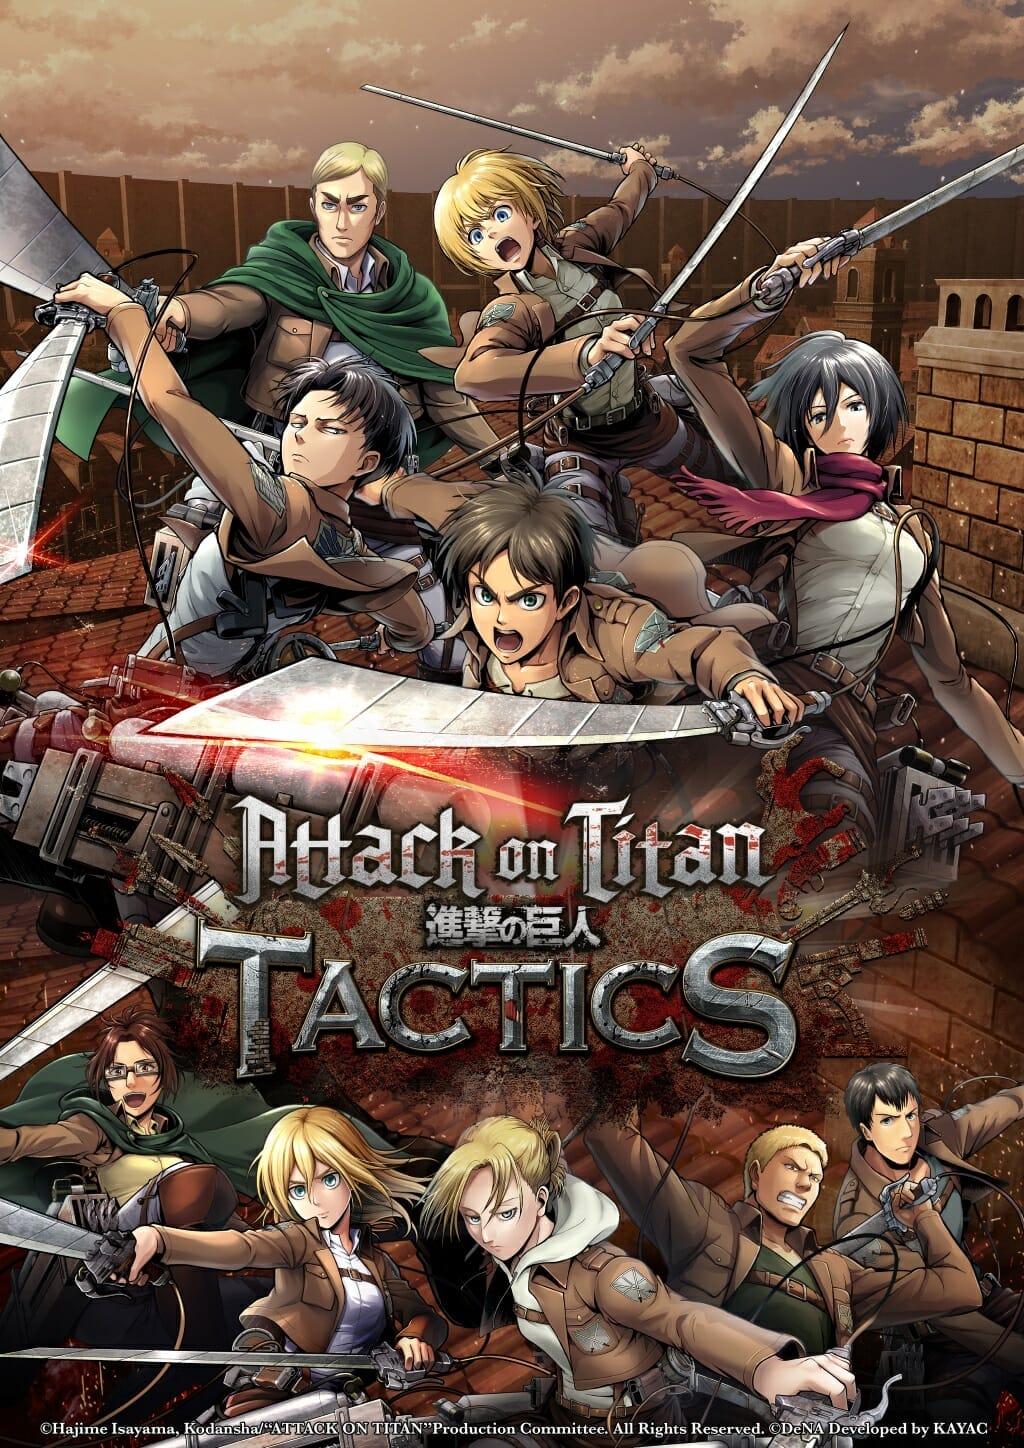 where to play attack on titan game